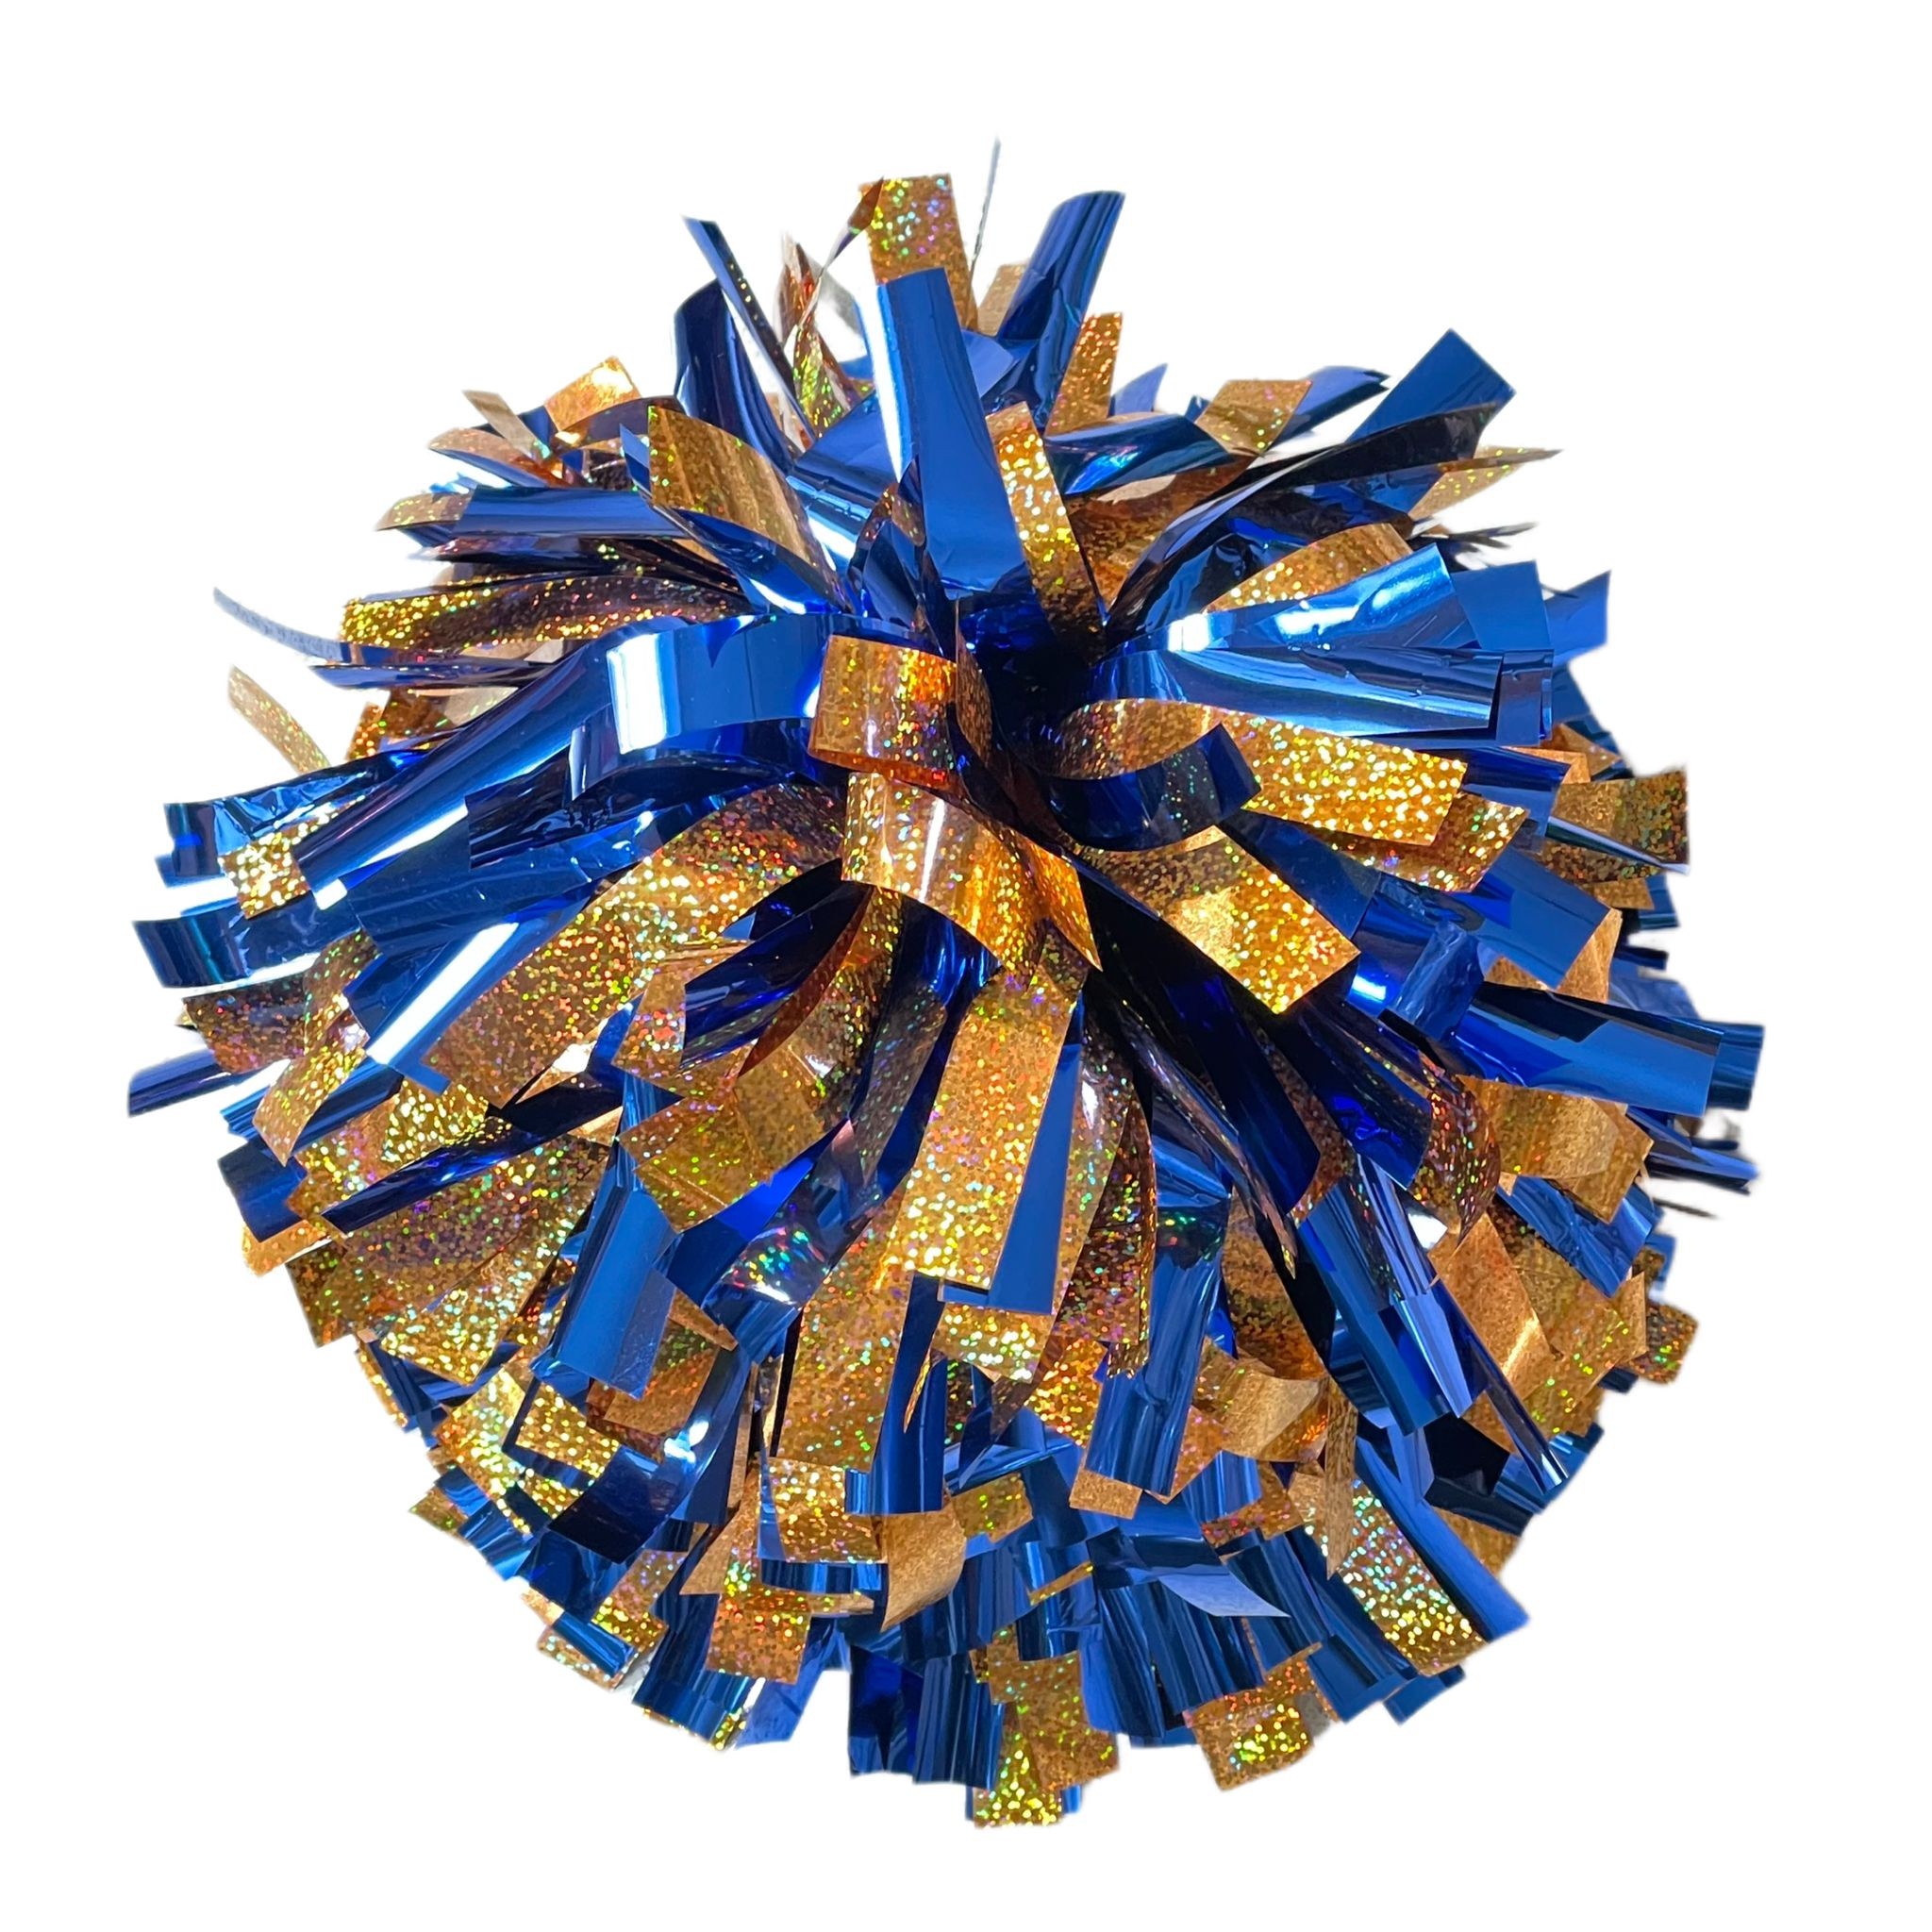 6" Poms Hologrographic Gold and Metallic Royal Blue